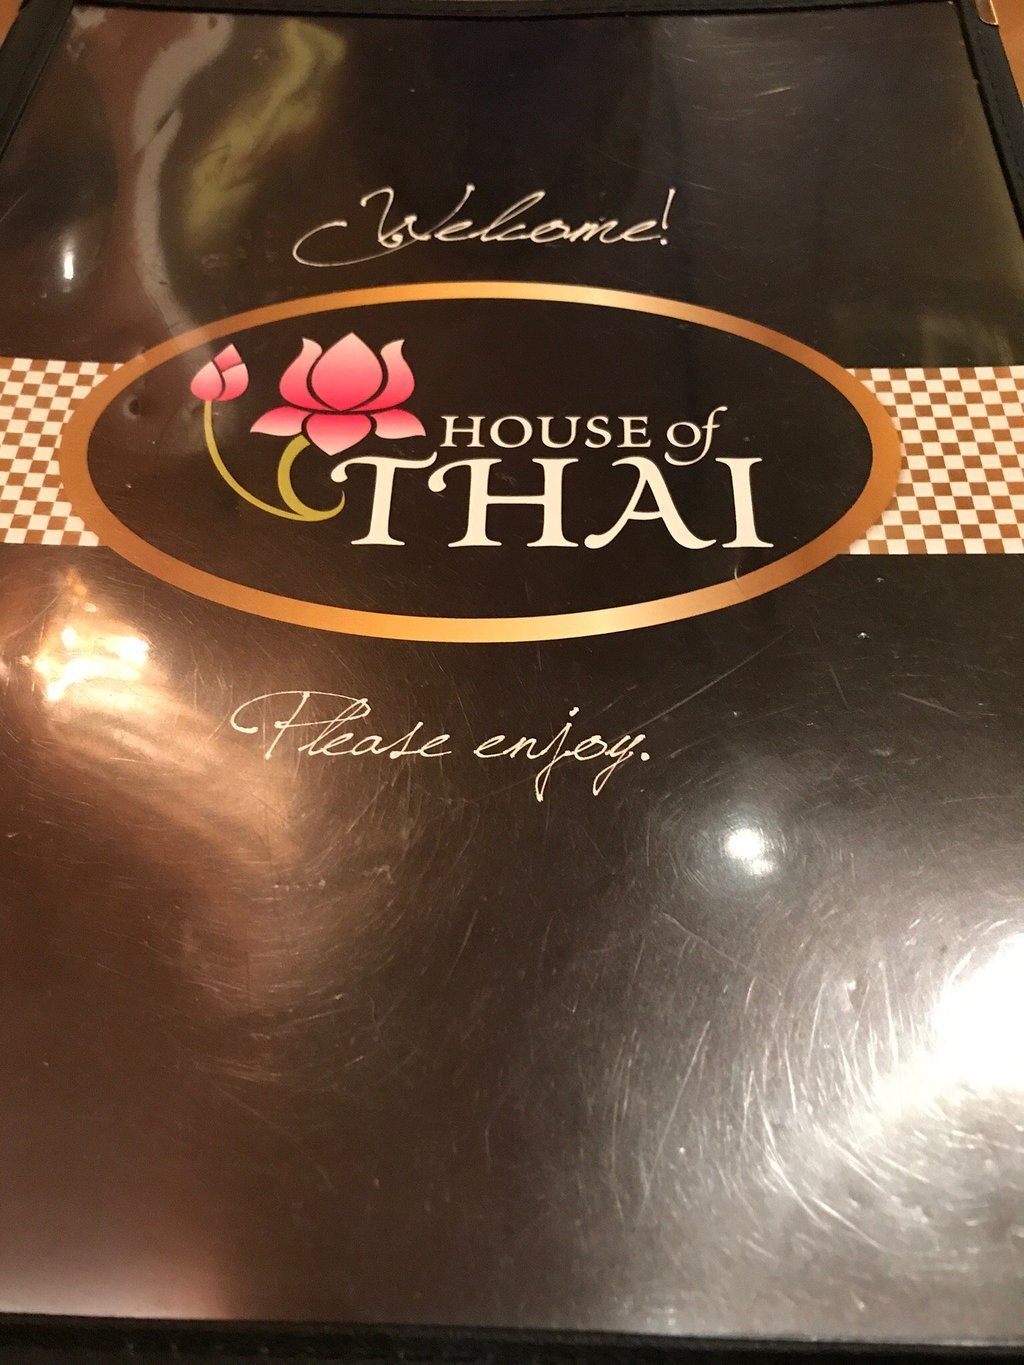 House of tdai